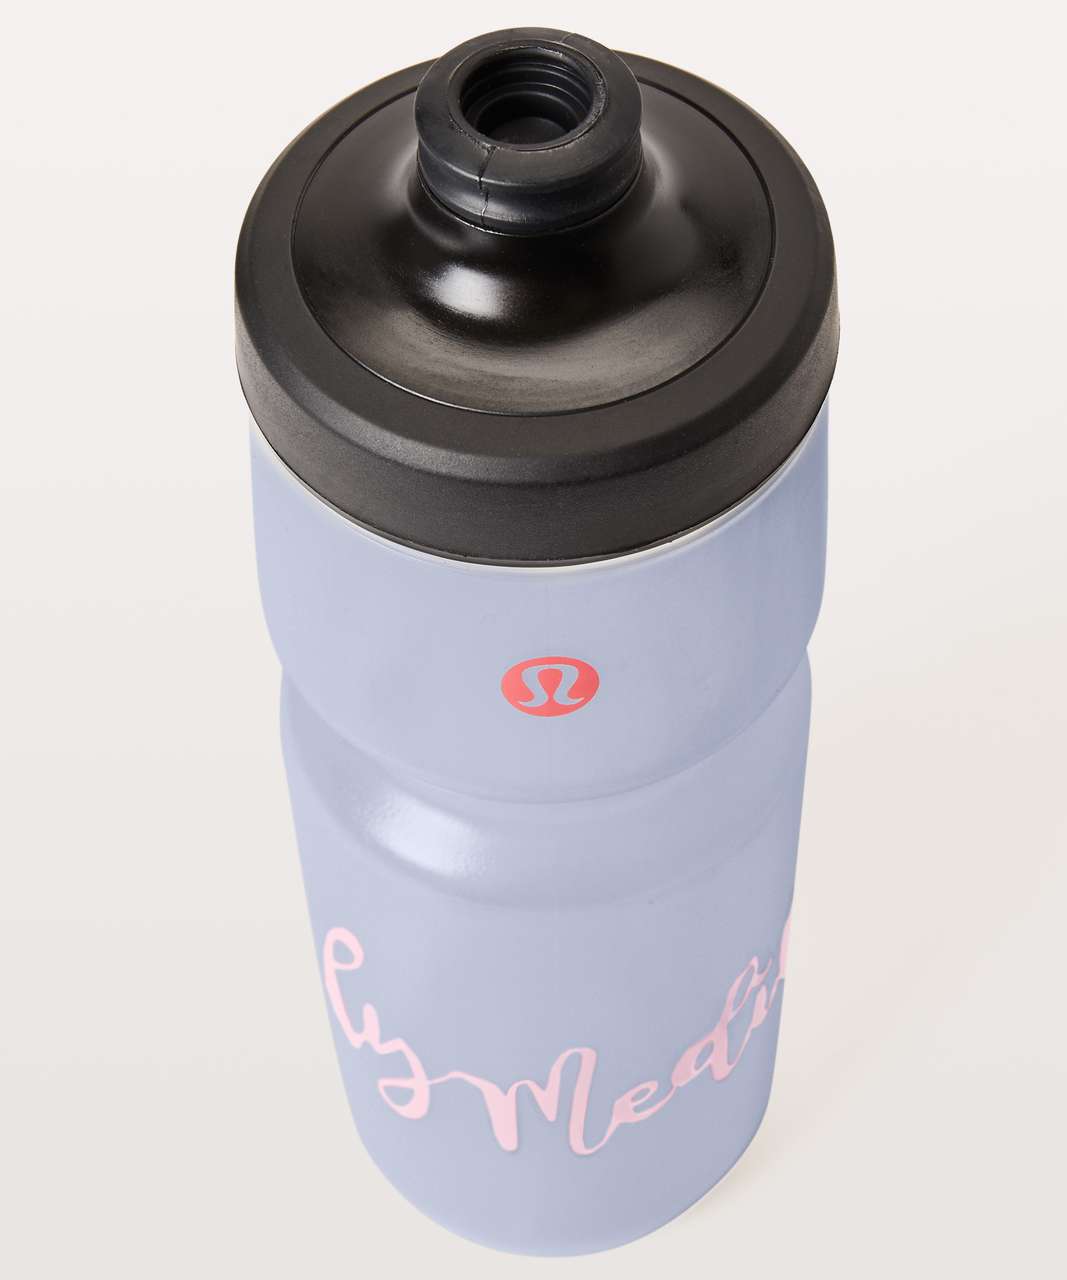 Lululemon Purist Cycling Water Bottle - Highly Meditated